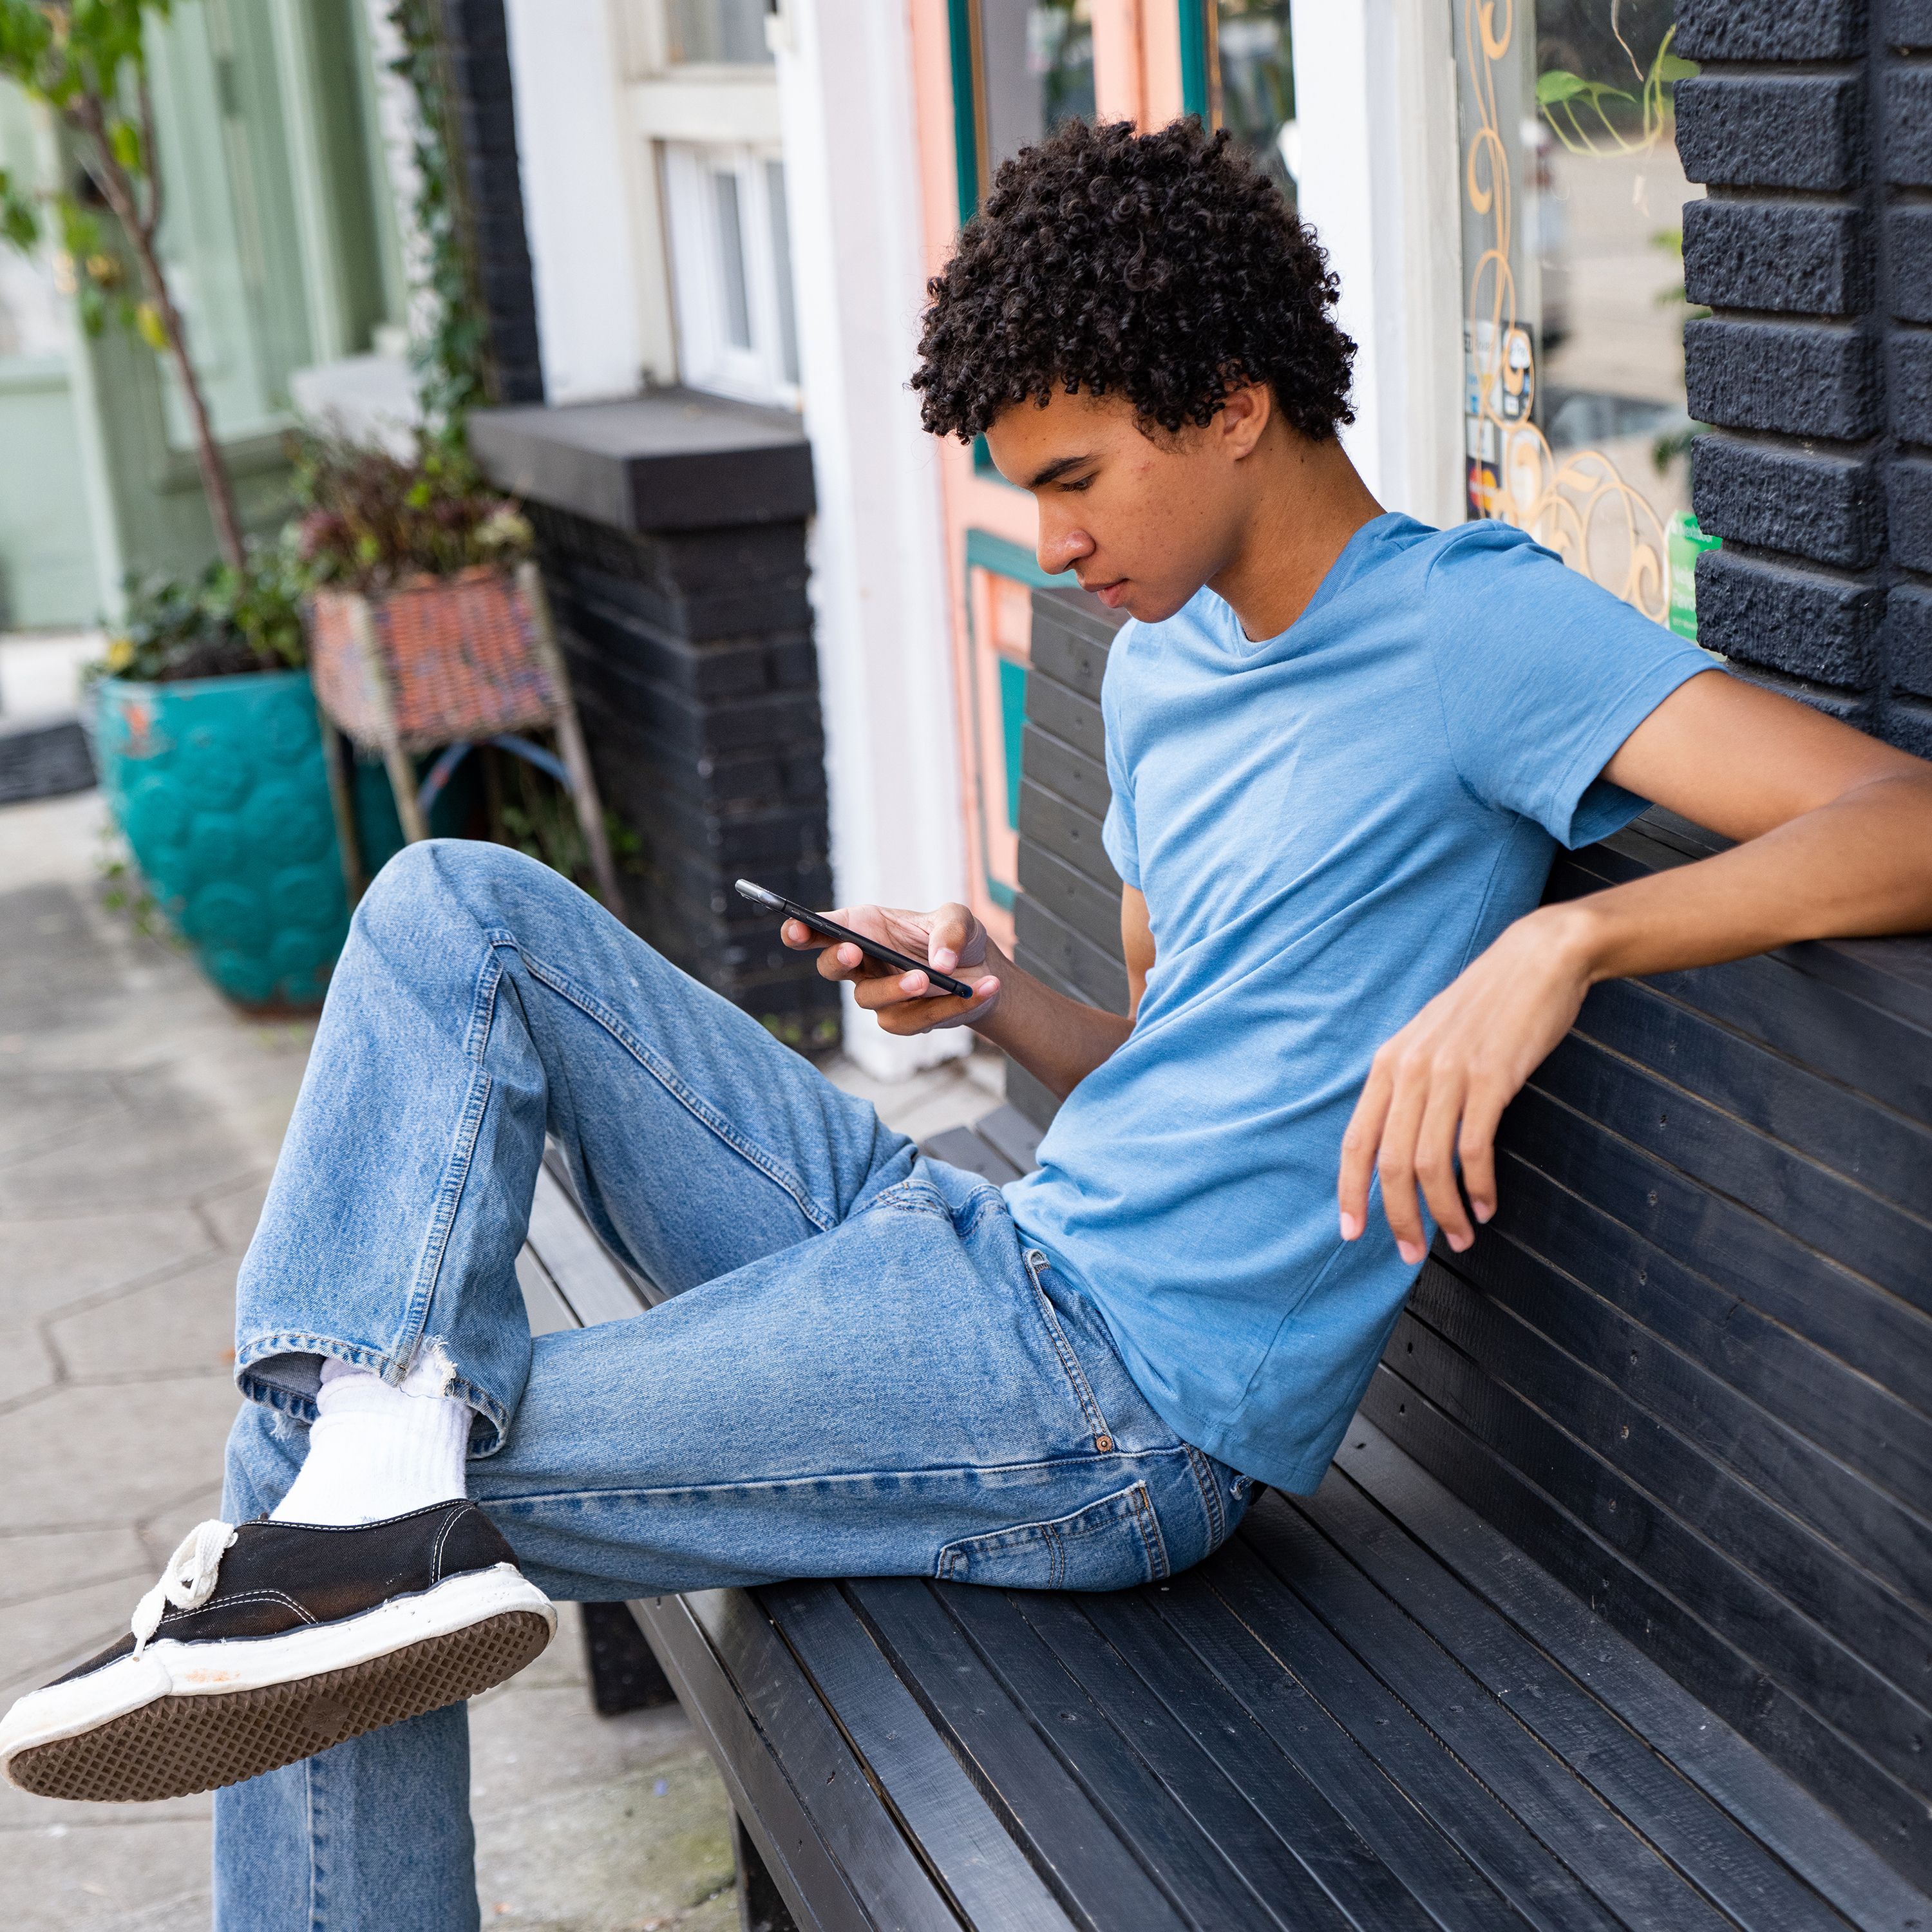 A person relaxes on a bench while looking at their mobile device.